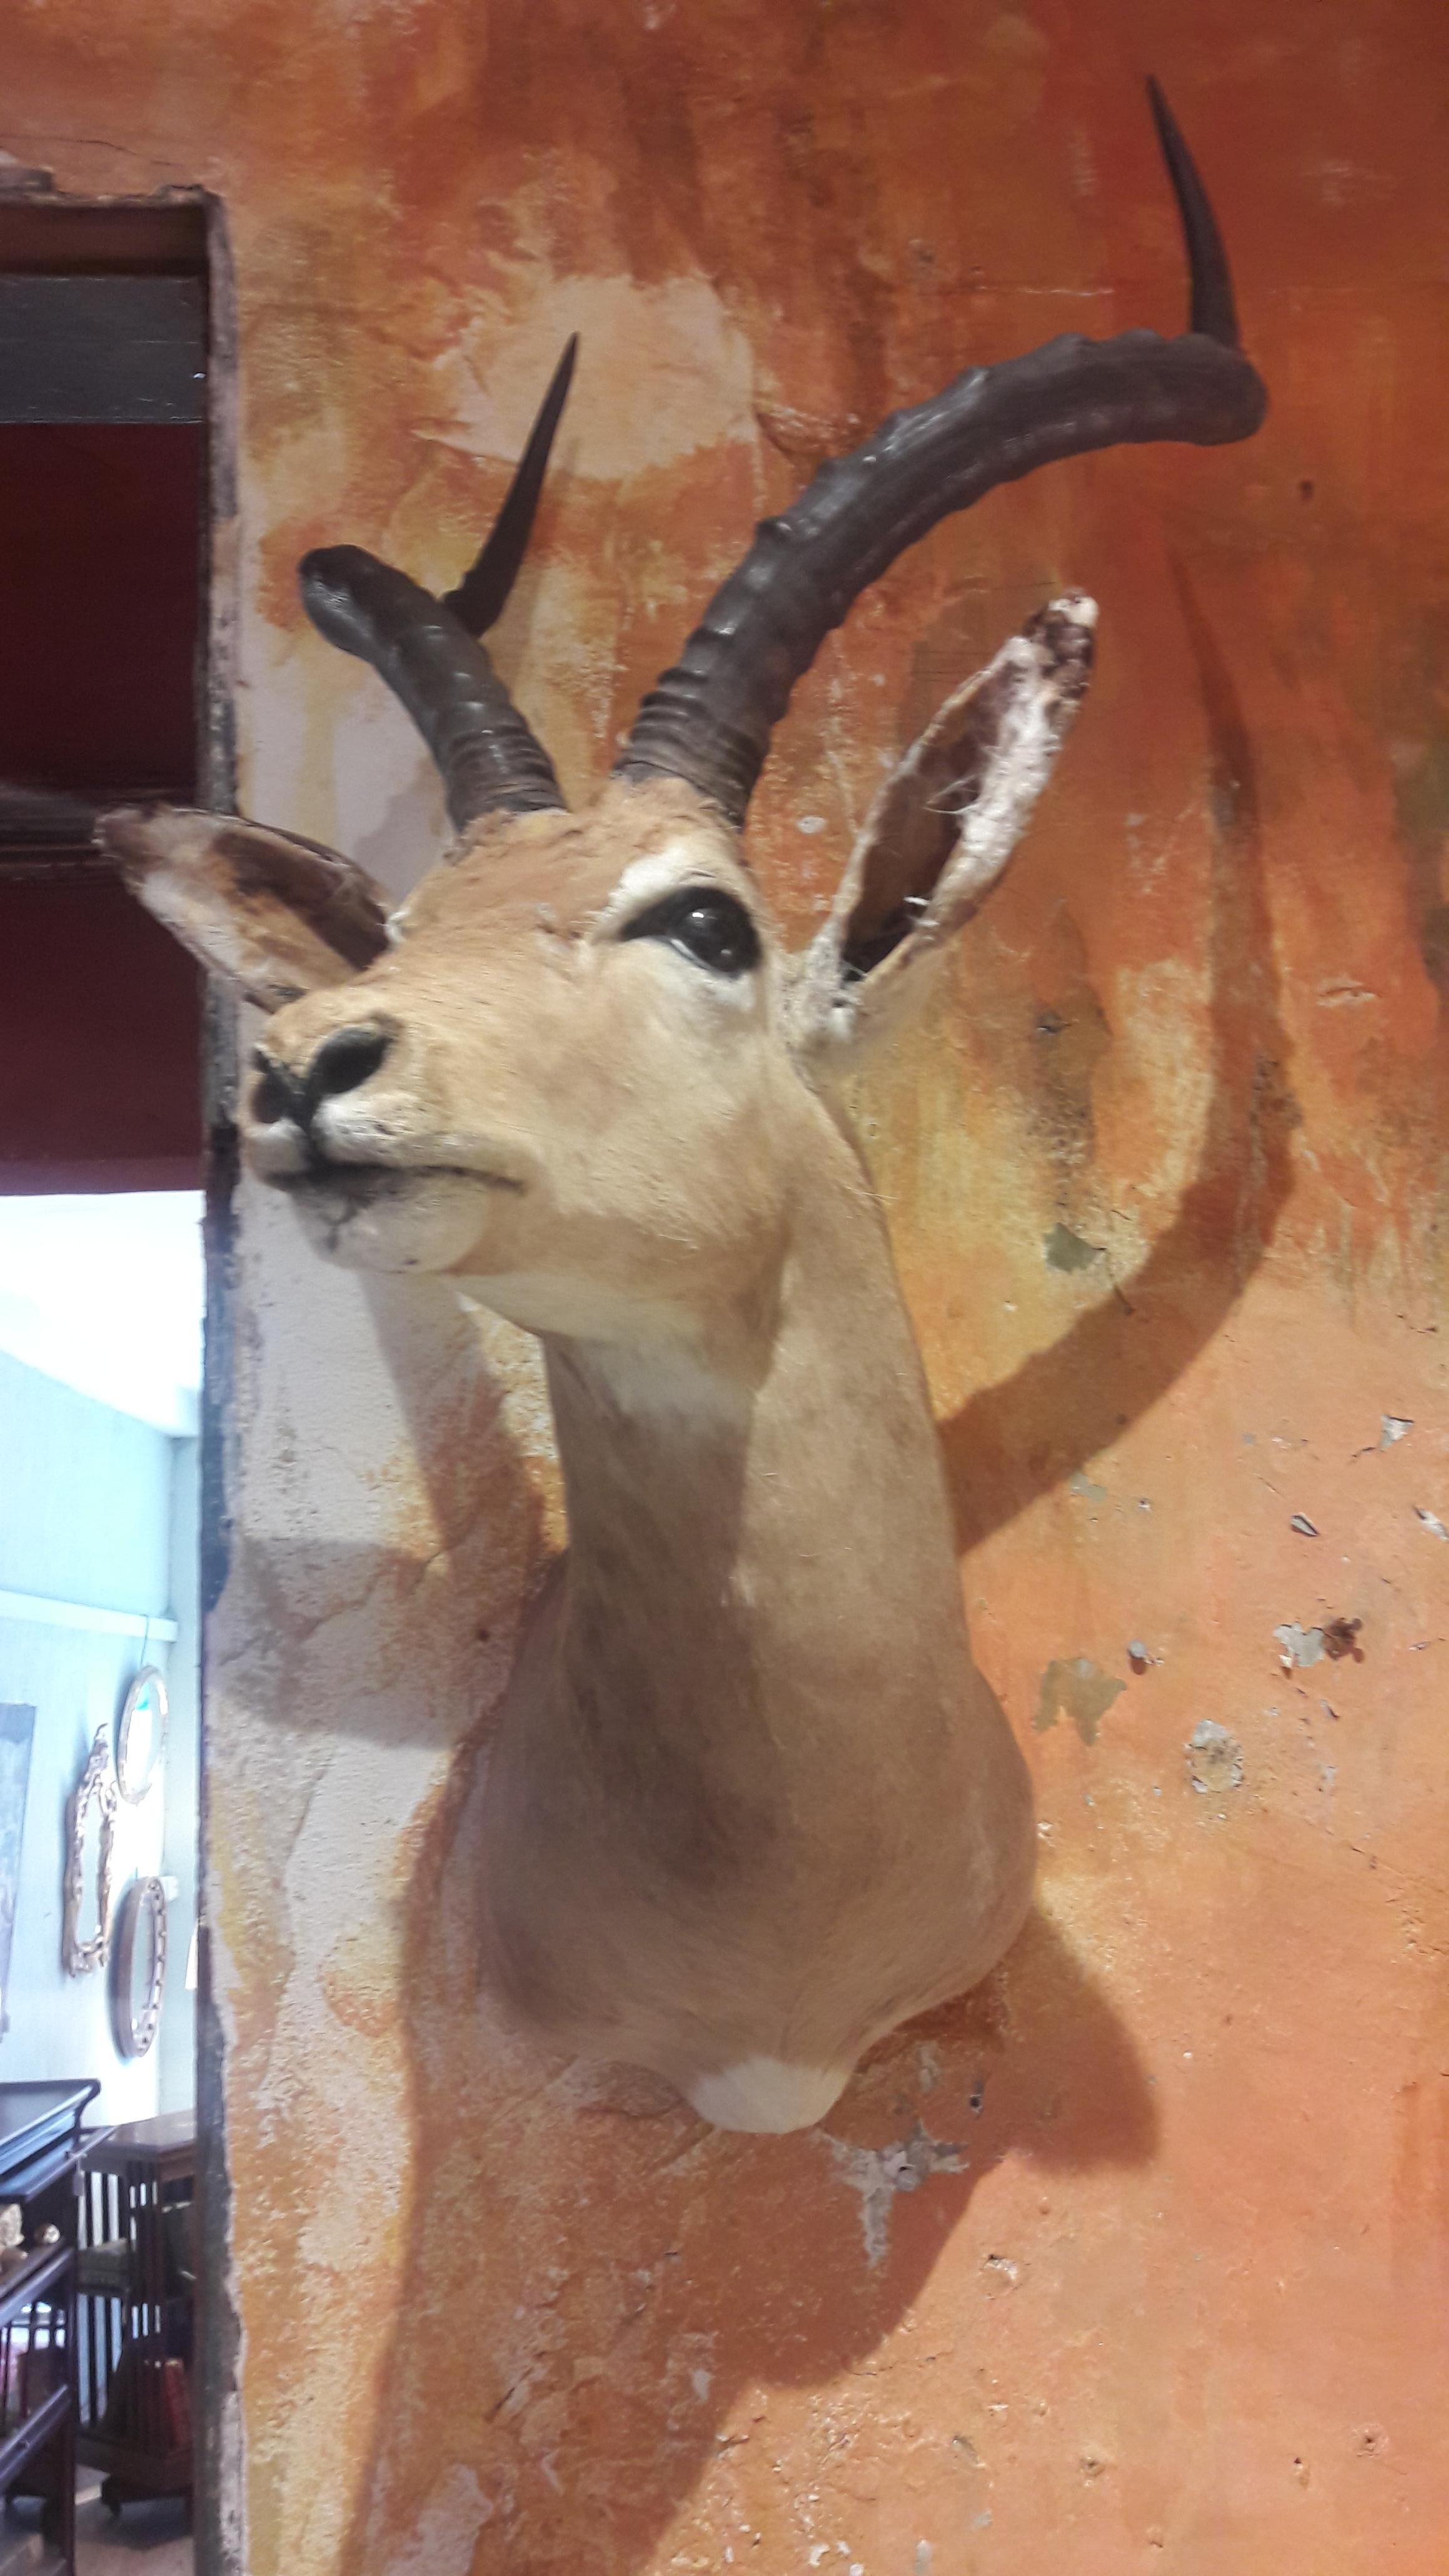 A friendly head of a stuffed antelope. On the last picture you can see that there is some fur missing, but this spot is colored so it's not visible when you put it on the wall.